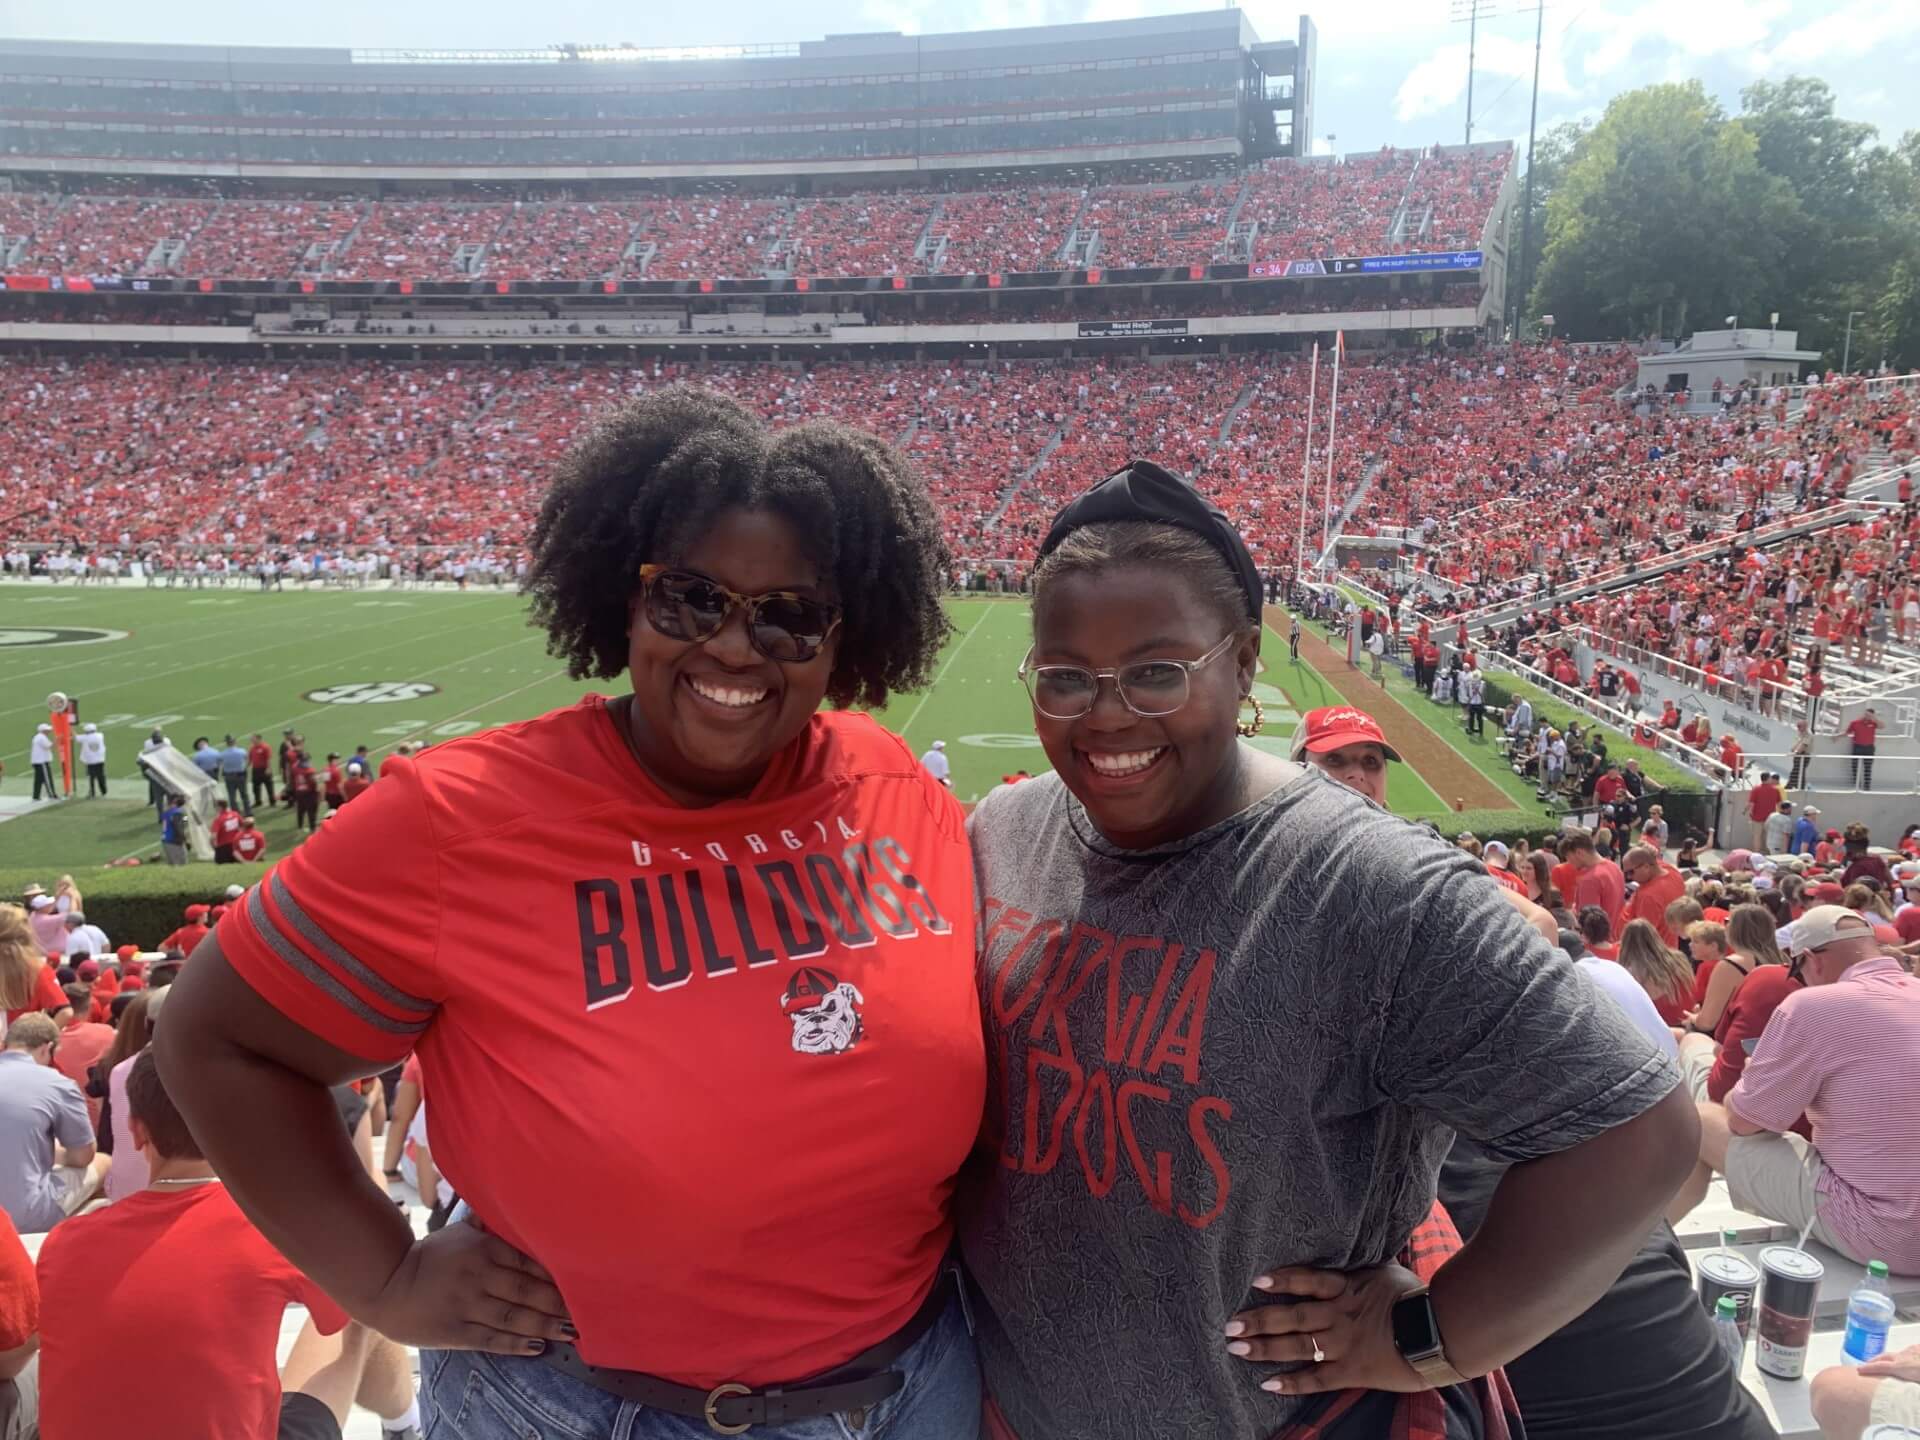 Charlene's daughters pose in the stands at a UGA football game